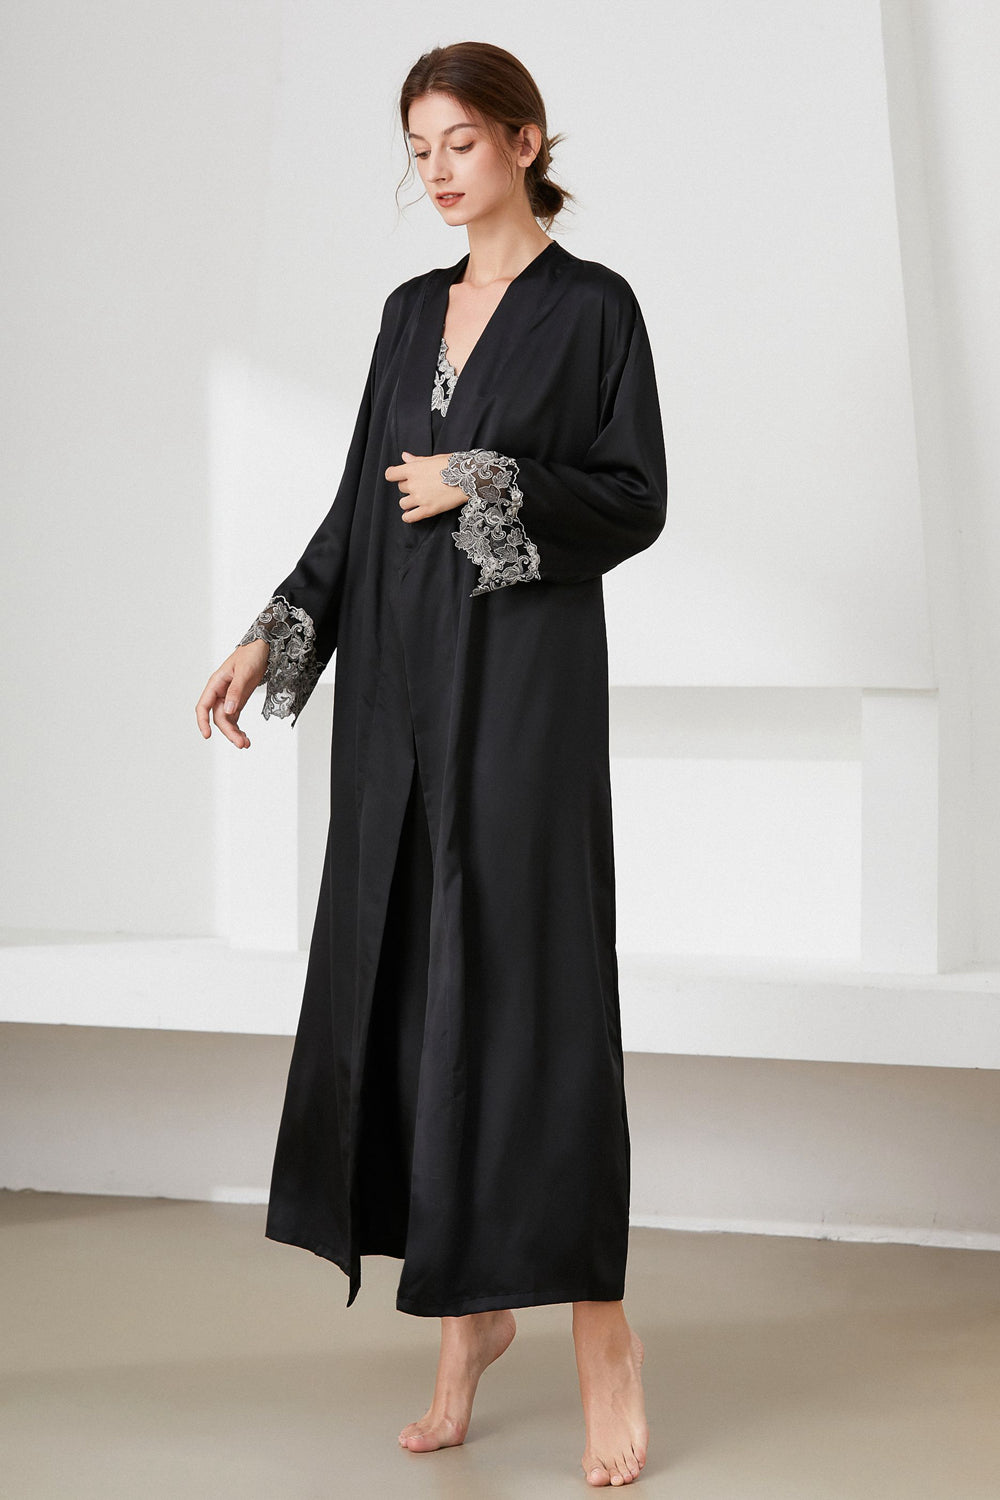 Angle view of woman standing wearing black satin nightdress and matching robe, with lace trim